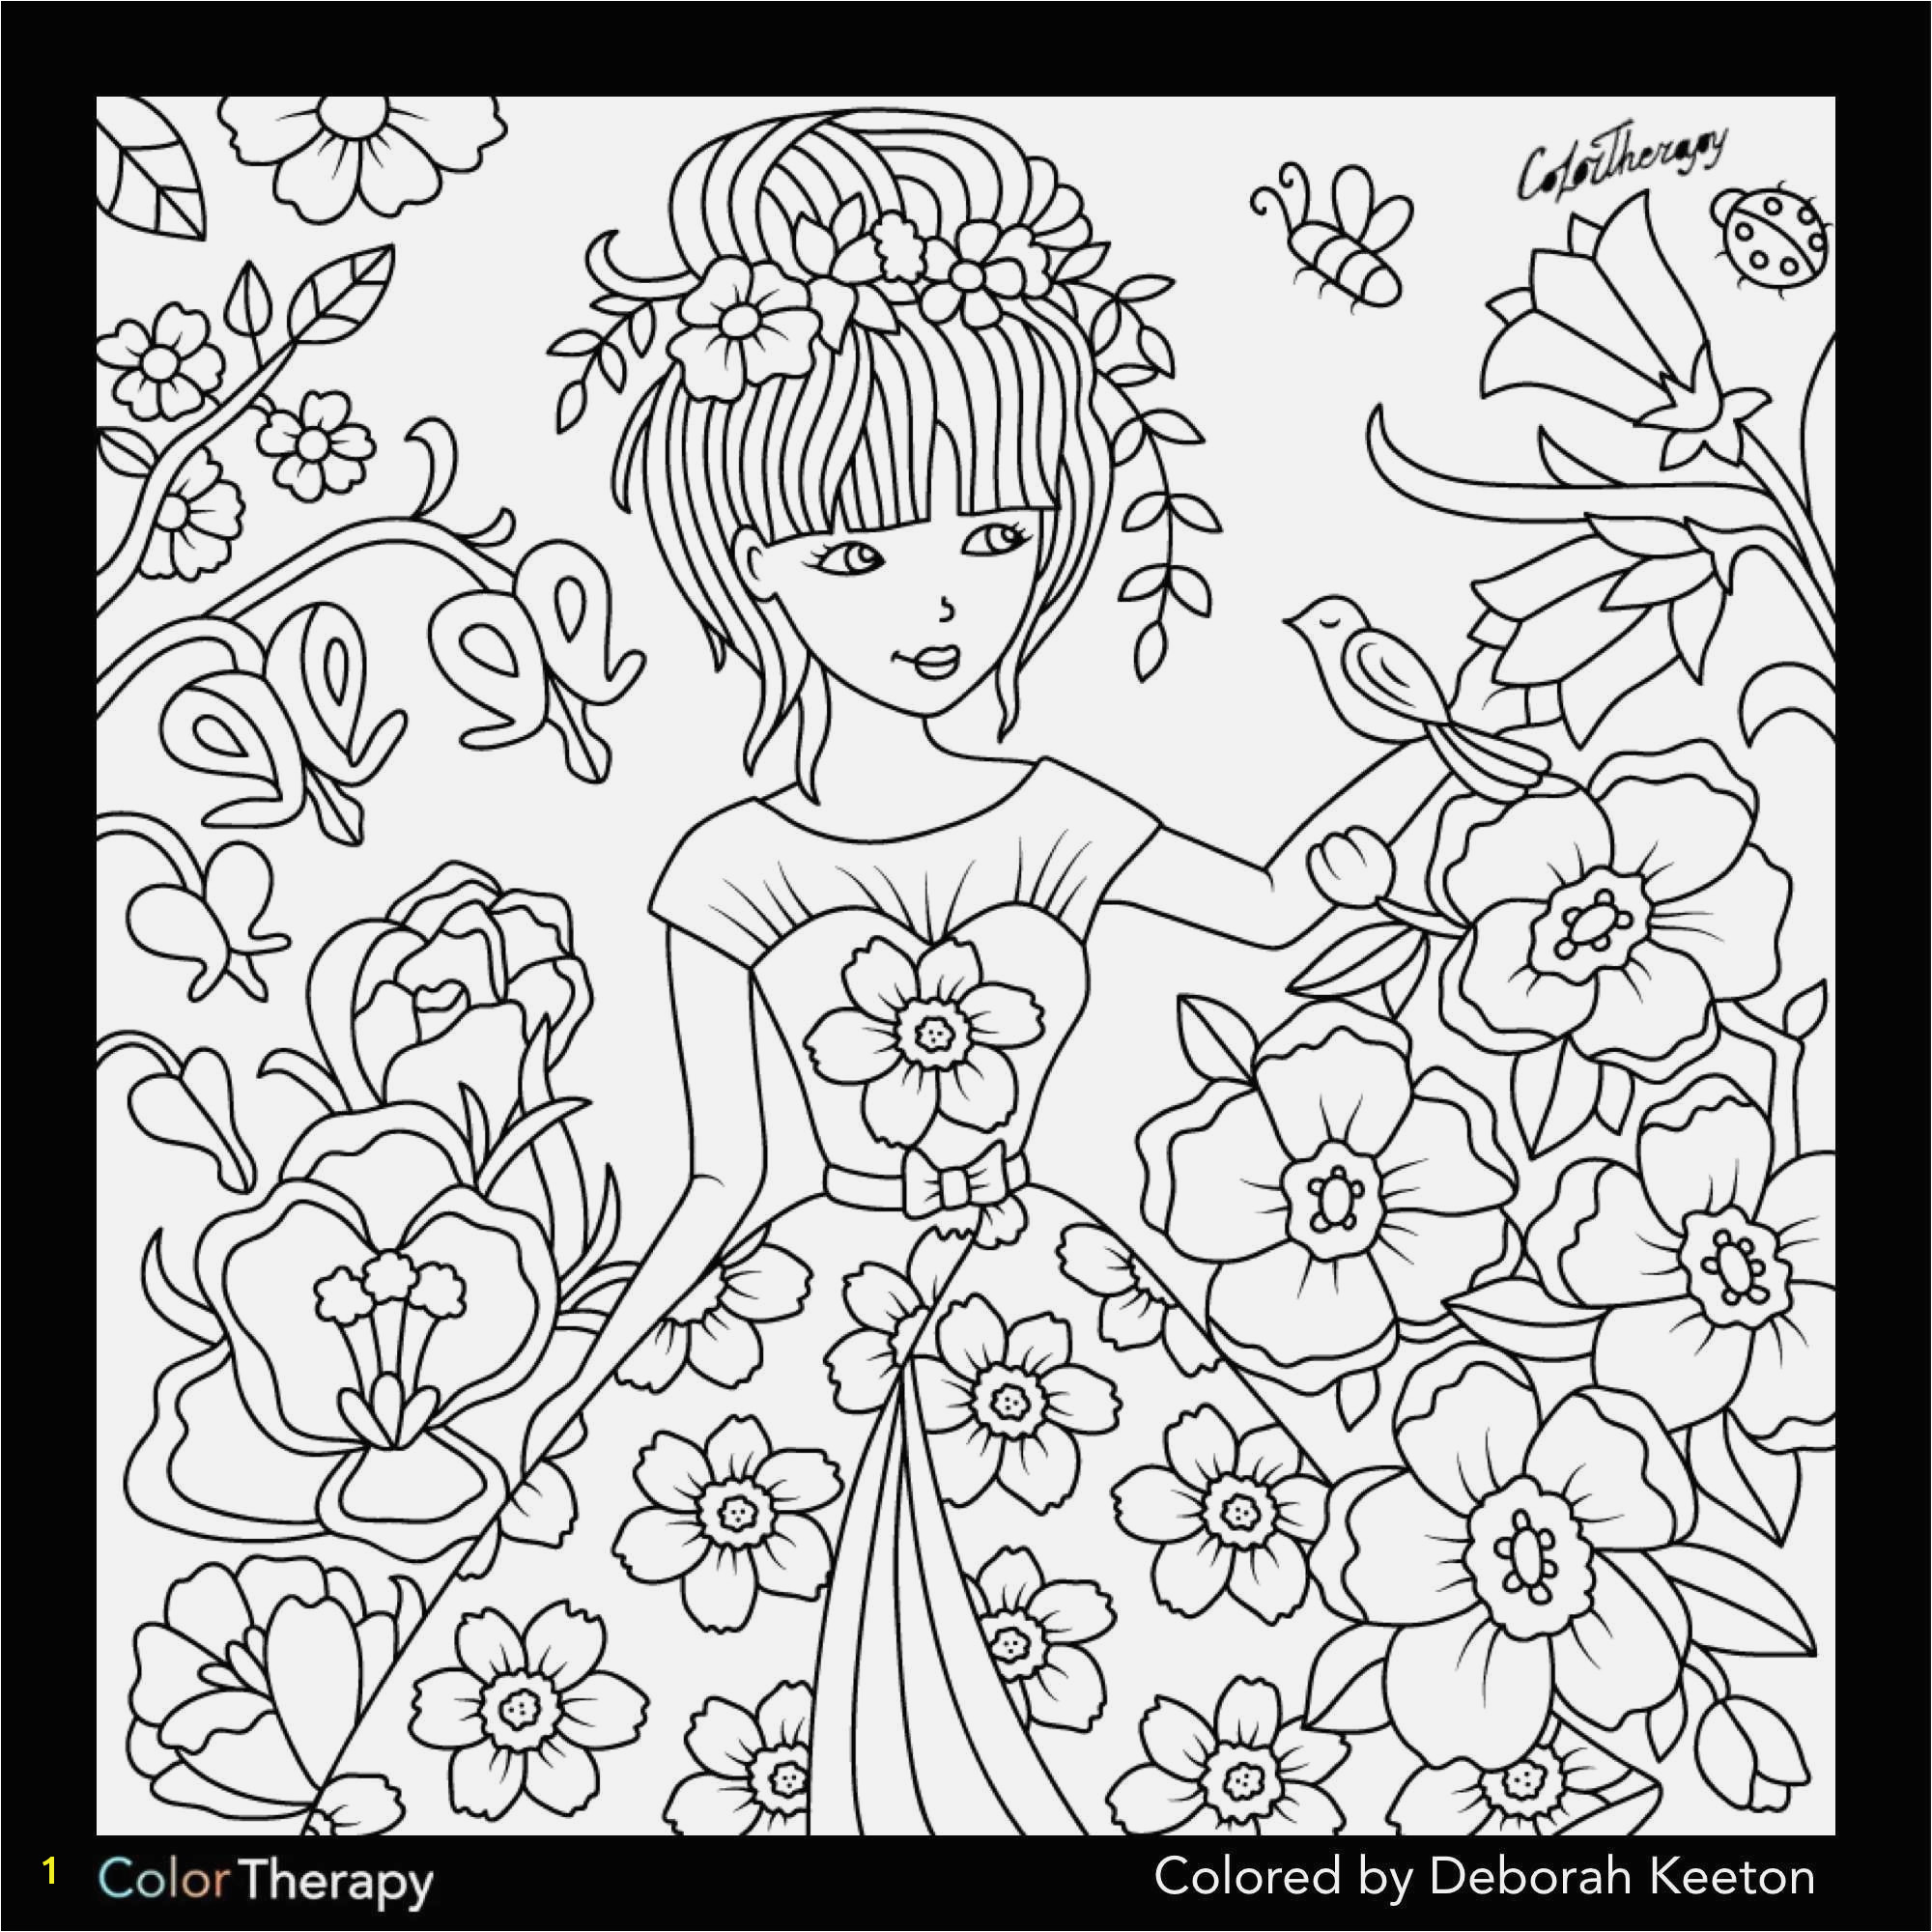 Friendship Coloring Pages Free Free Superhero Coloring Pages New Free Printable Art 0 0d Friendship